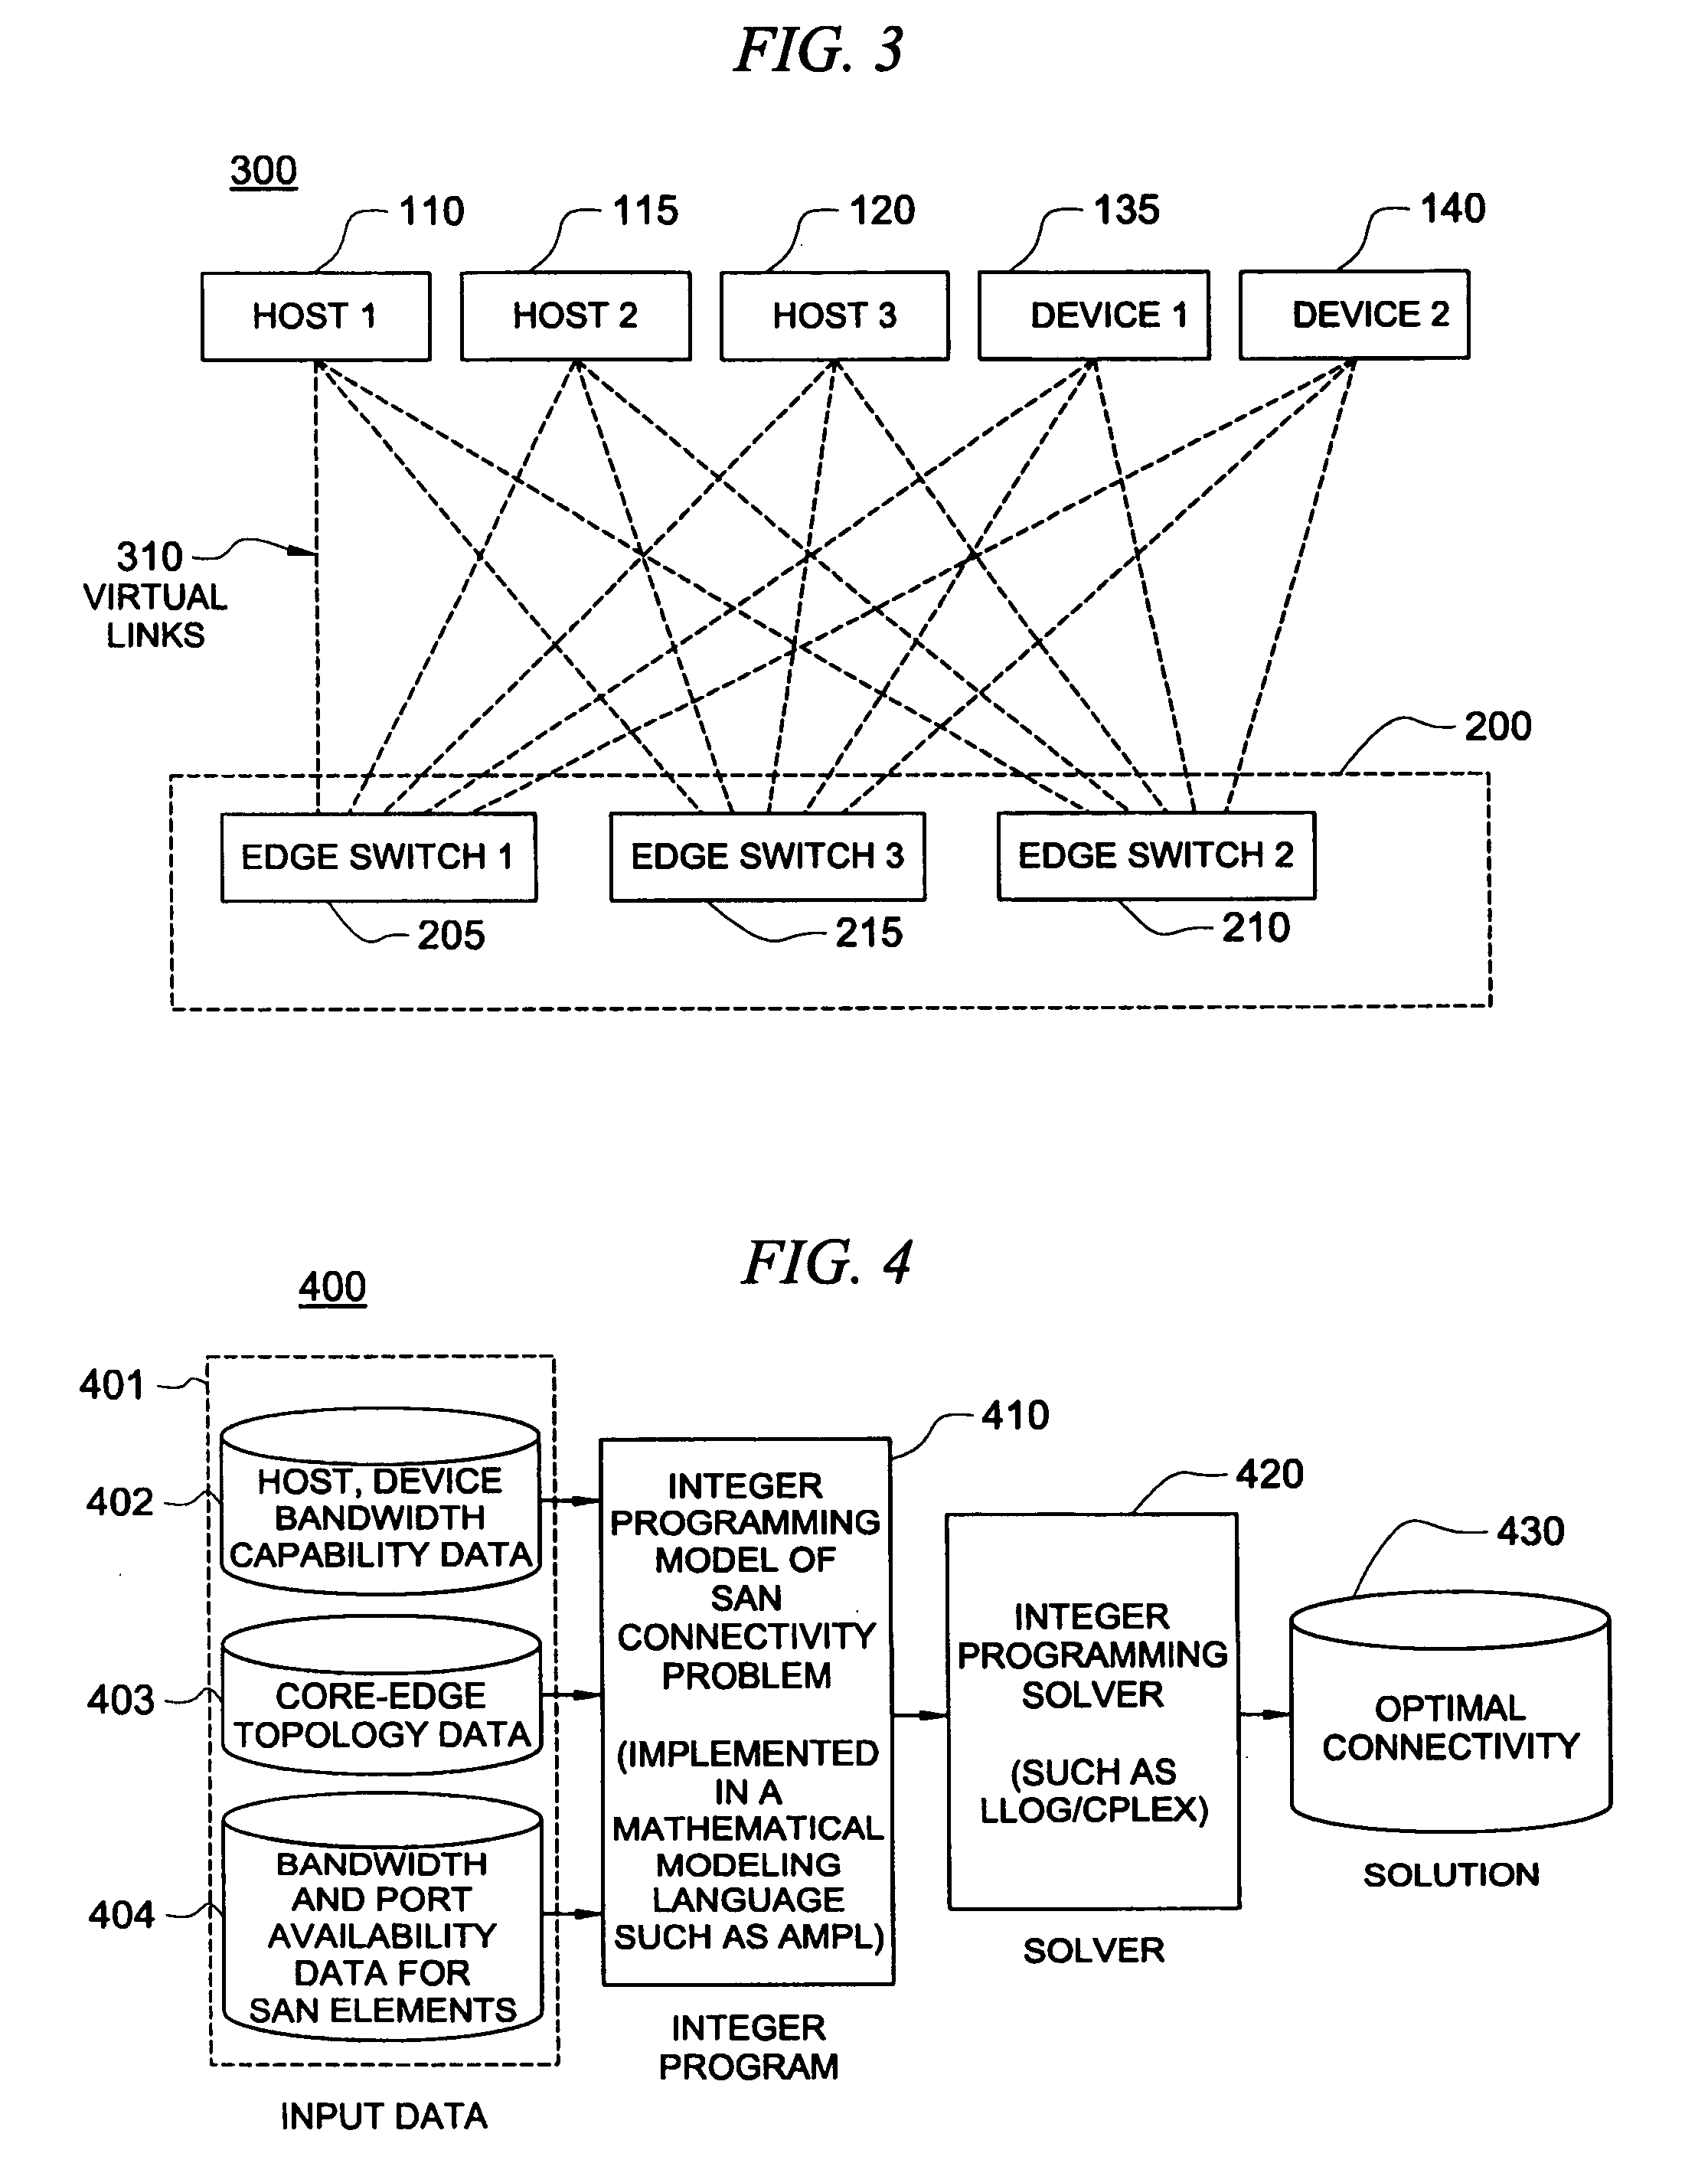 System and method for connectivity between hosts and devices